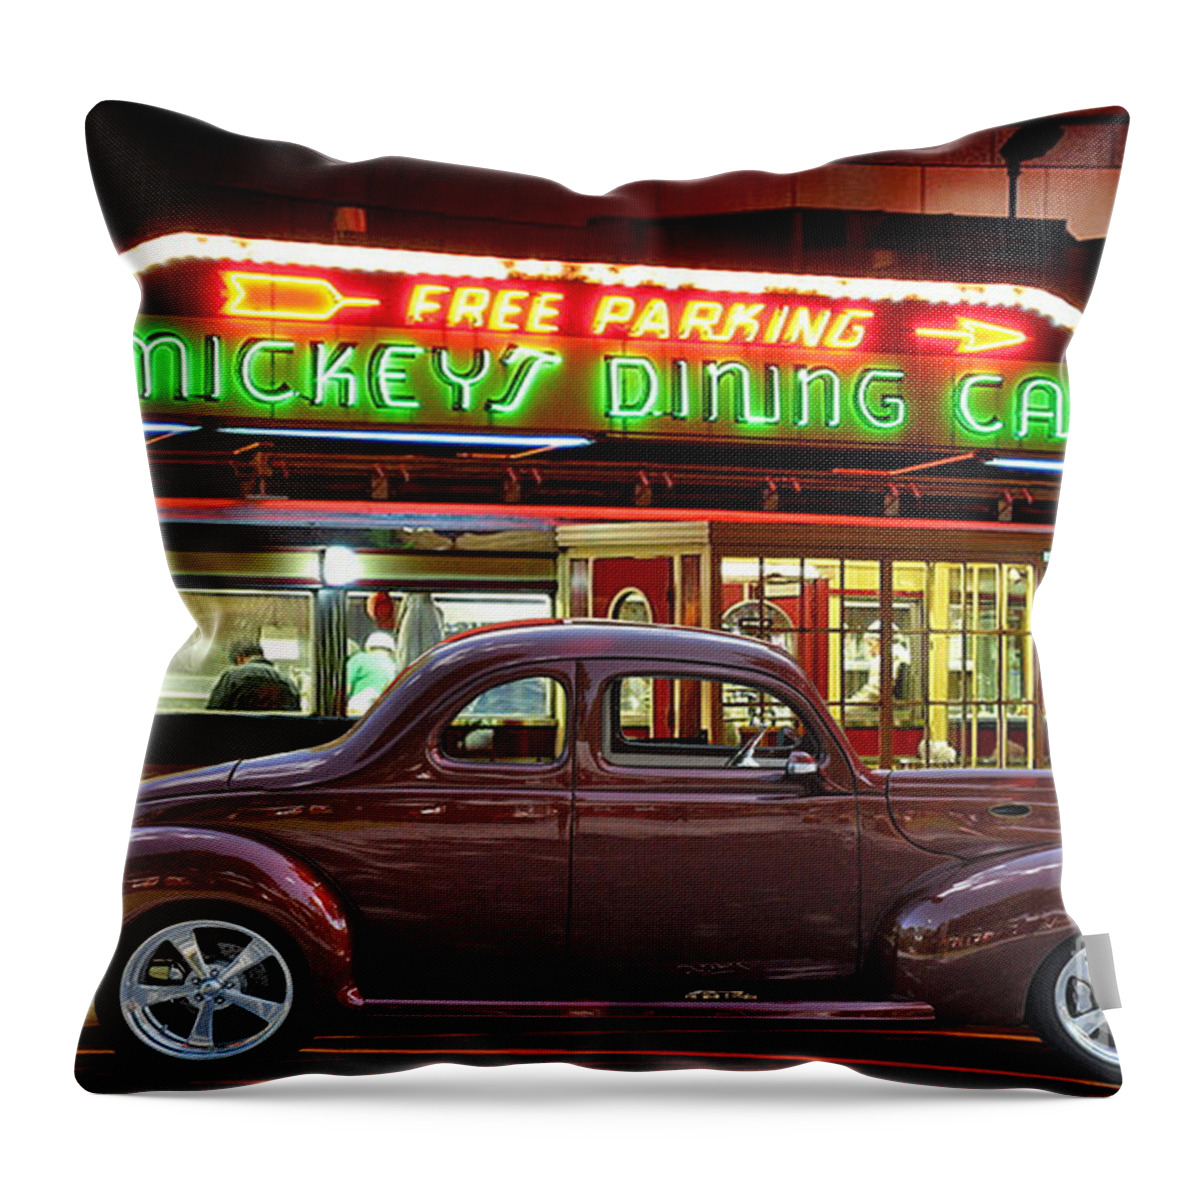 Old Throw Pillow featuring the photograph 1940 Ford Deluxe Coupe at Mickeys Dinner by Gary Keesler